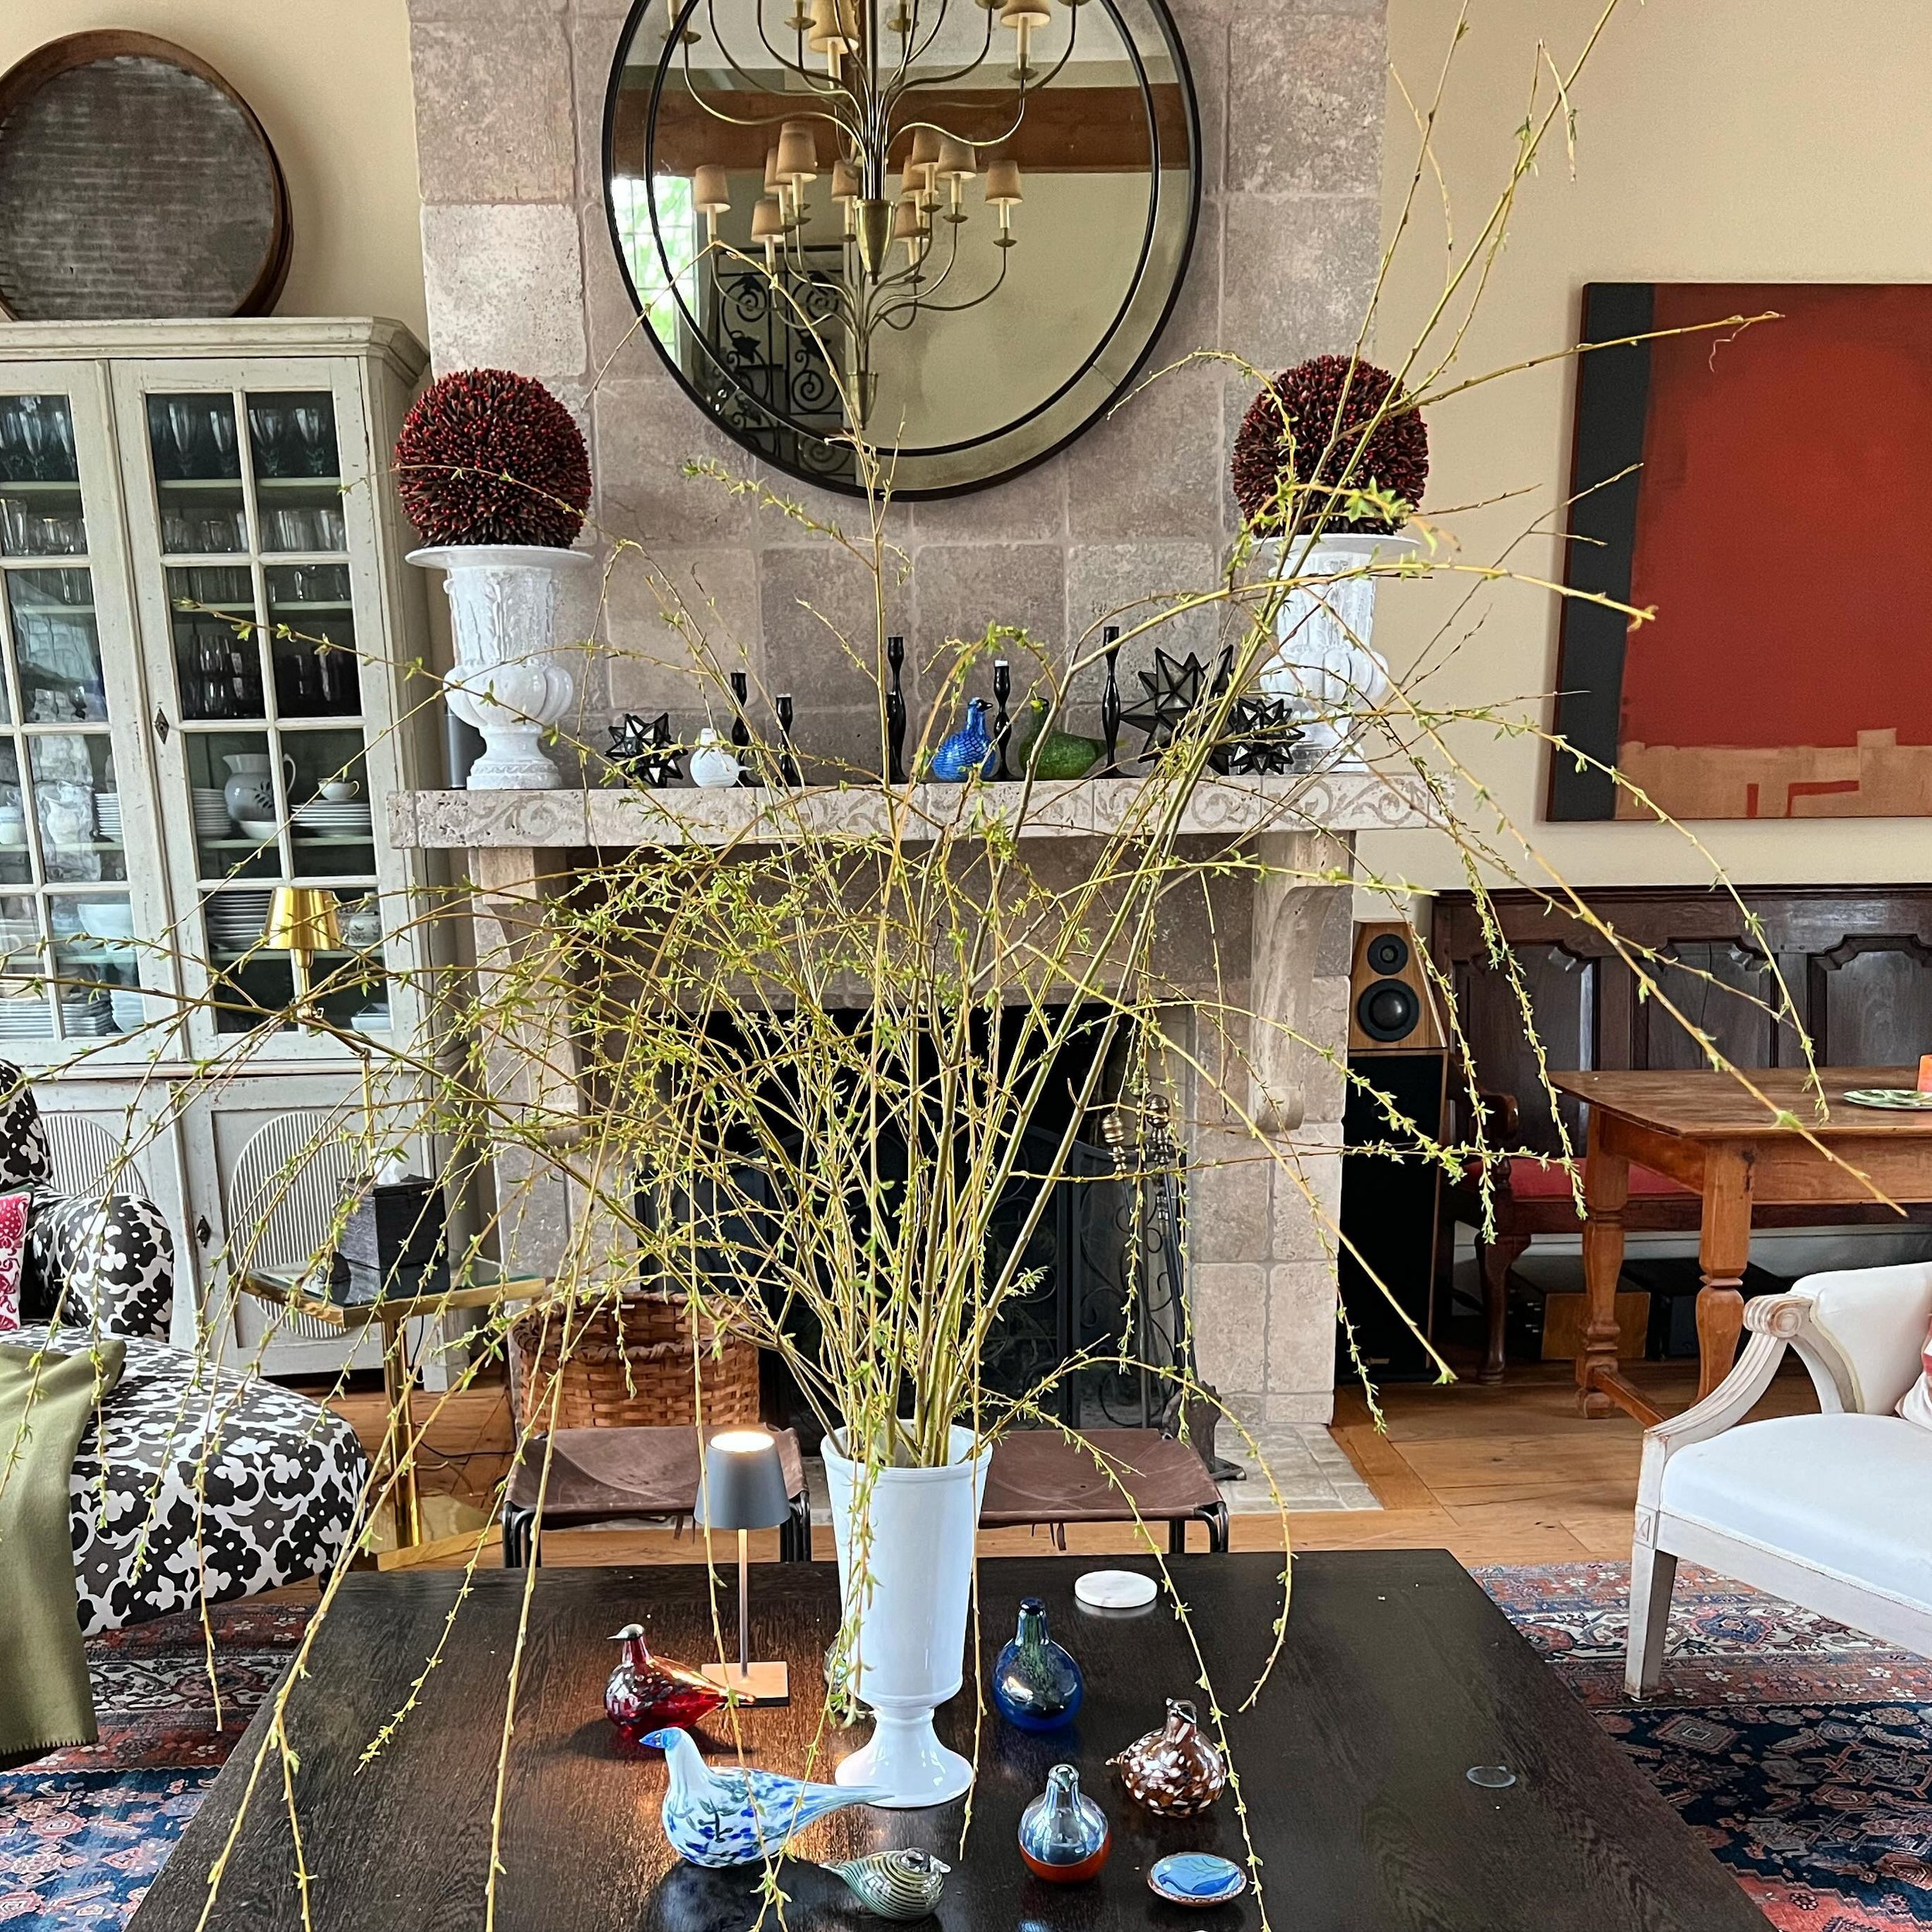 When the wind whips your weeping willow&hellip;use it as a focal point.  #weepingwillow #focalpoint #centerpiece #lifestyle #lovewhereyoulive